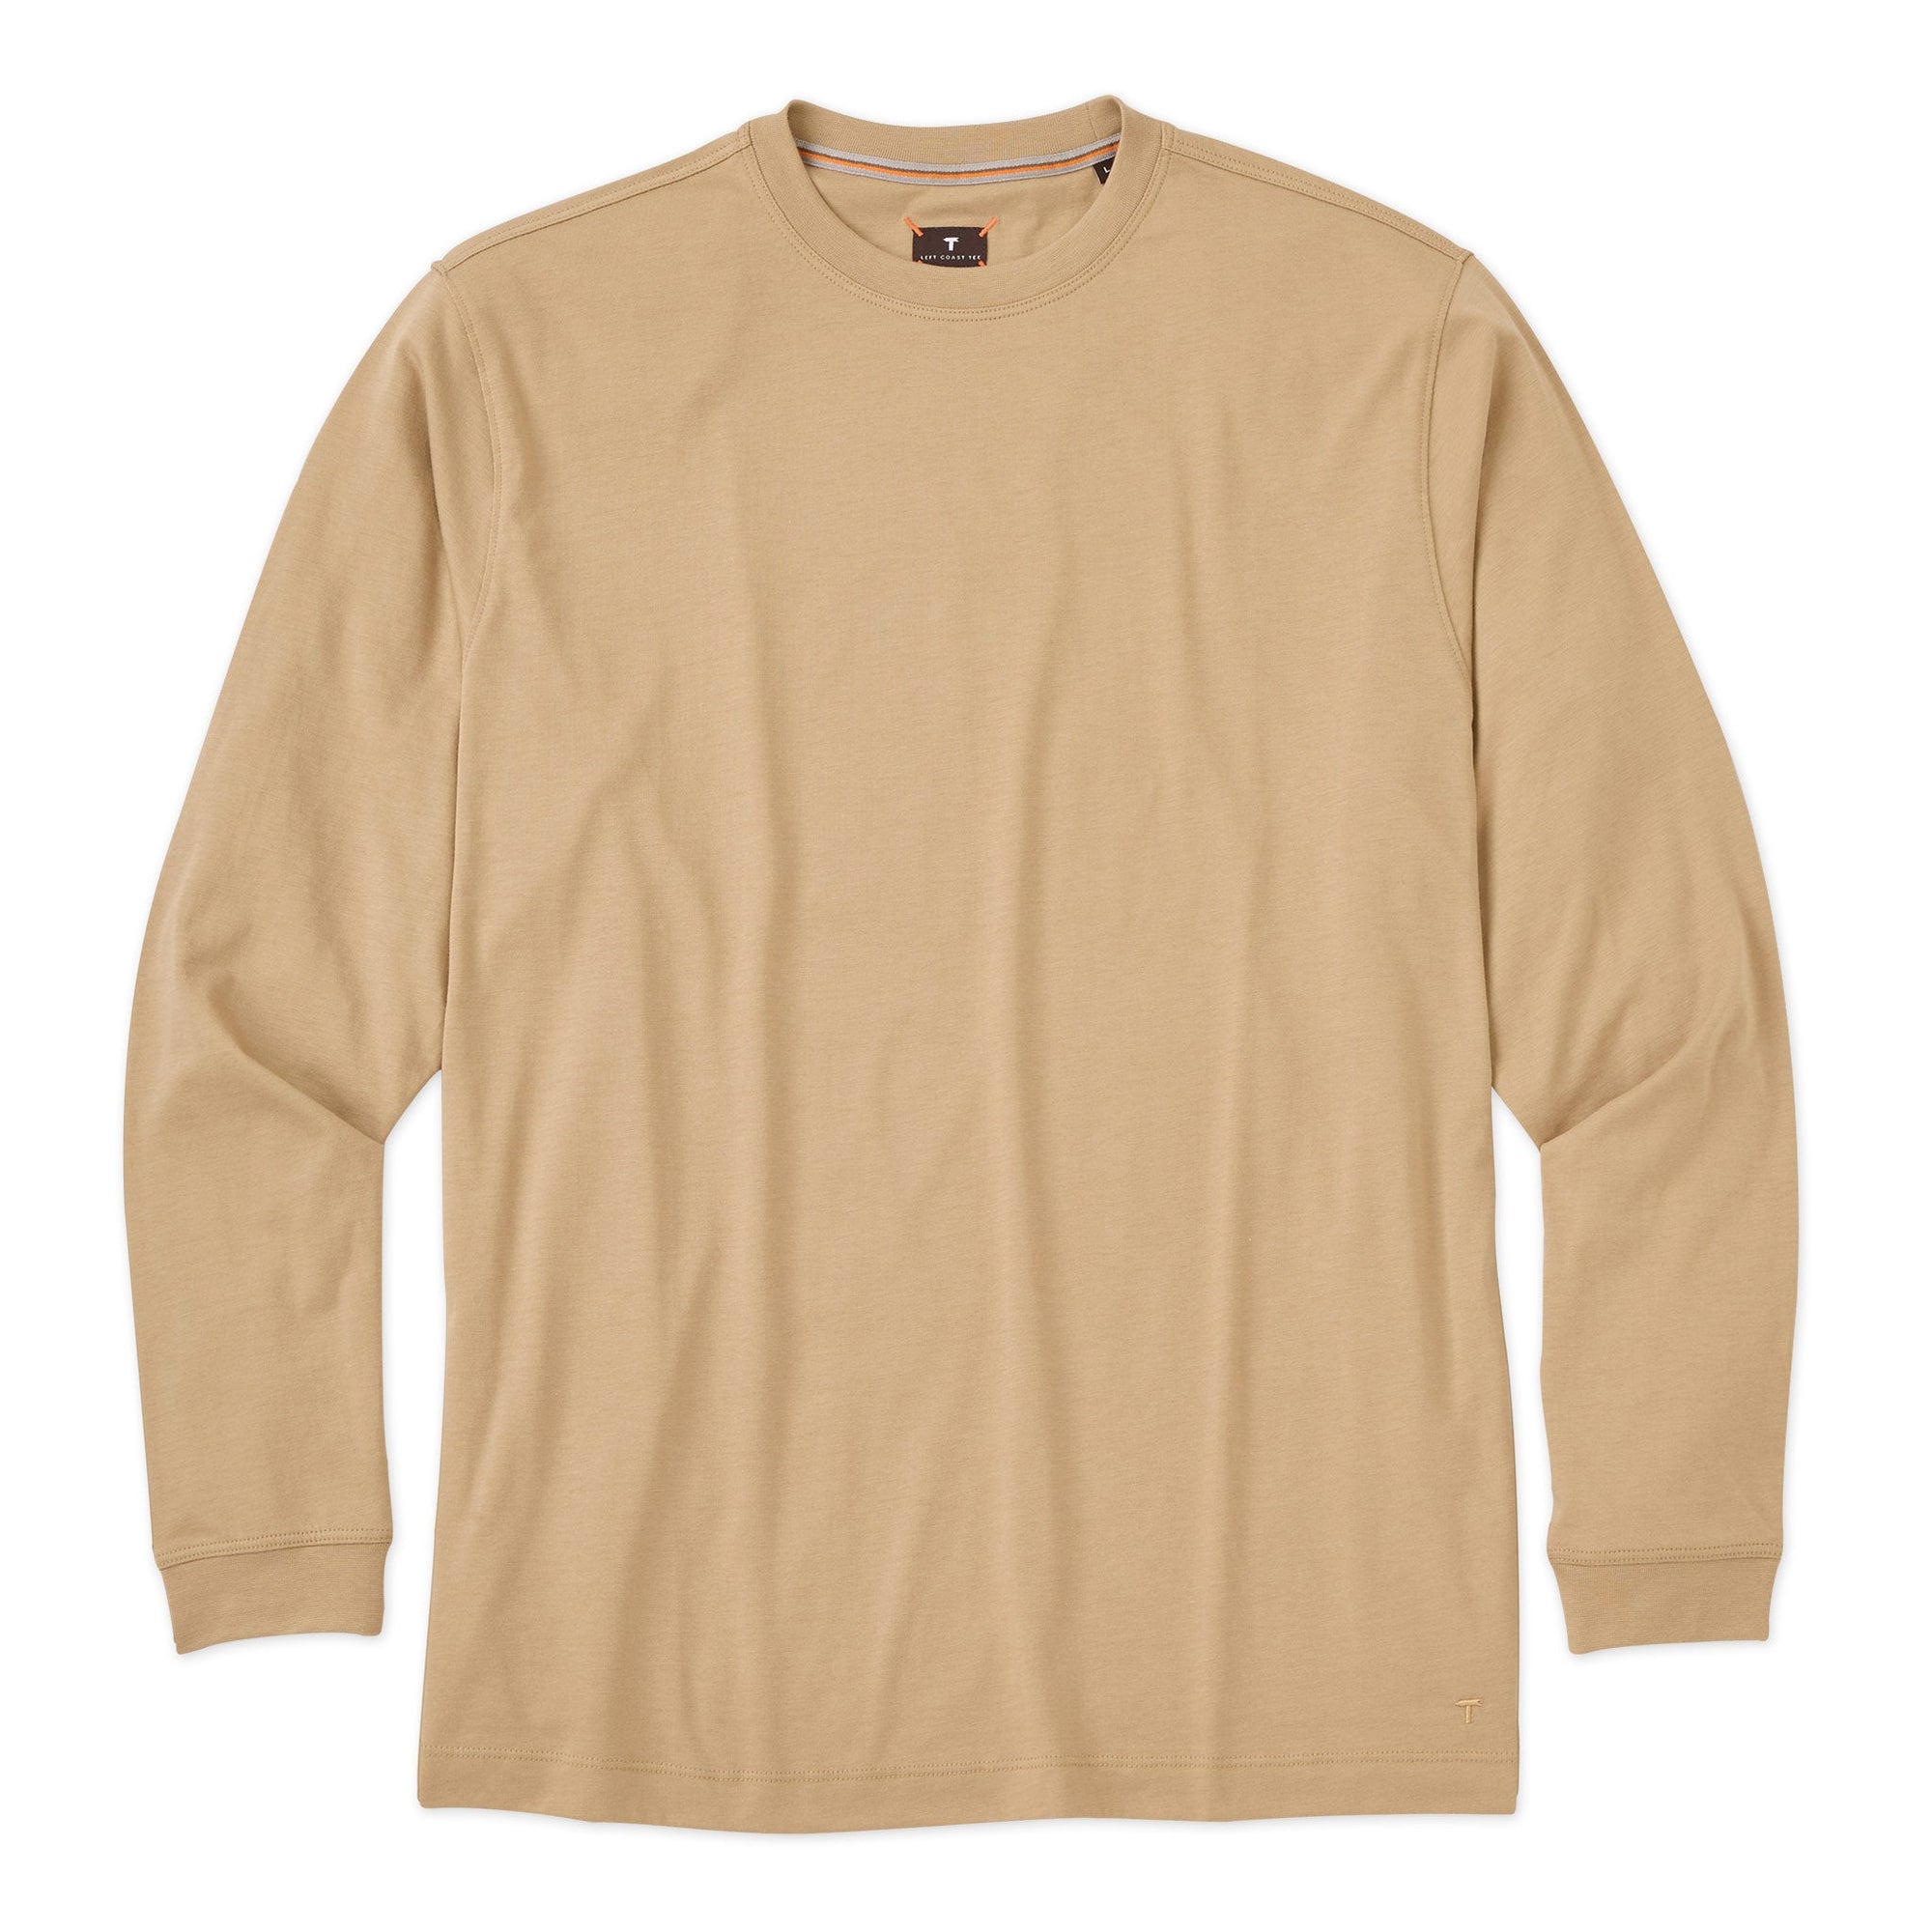 Long Sleeve Crew Neck Peruvian Cotton Tee Shirt in Taupe by Left Coast Tee